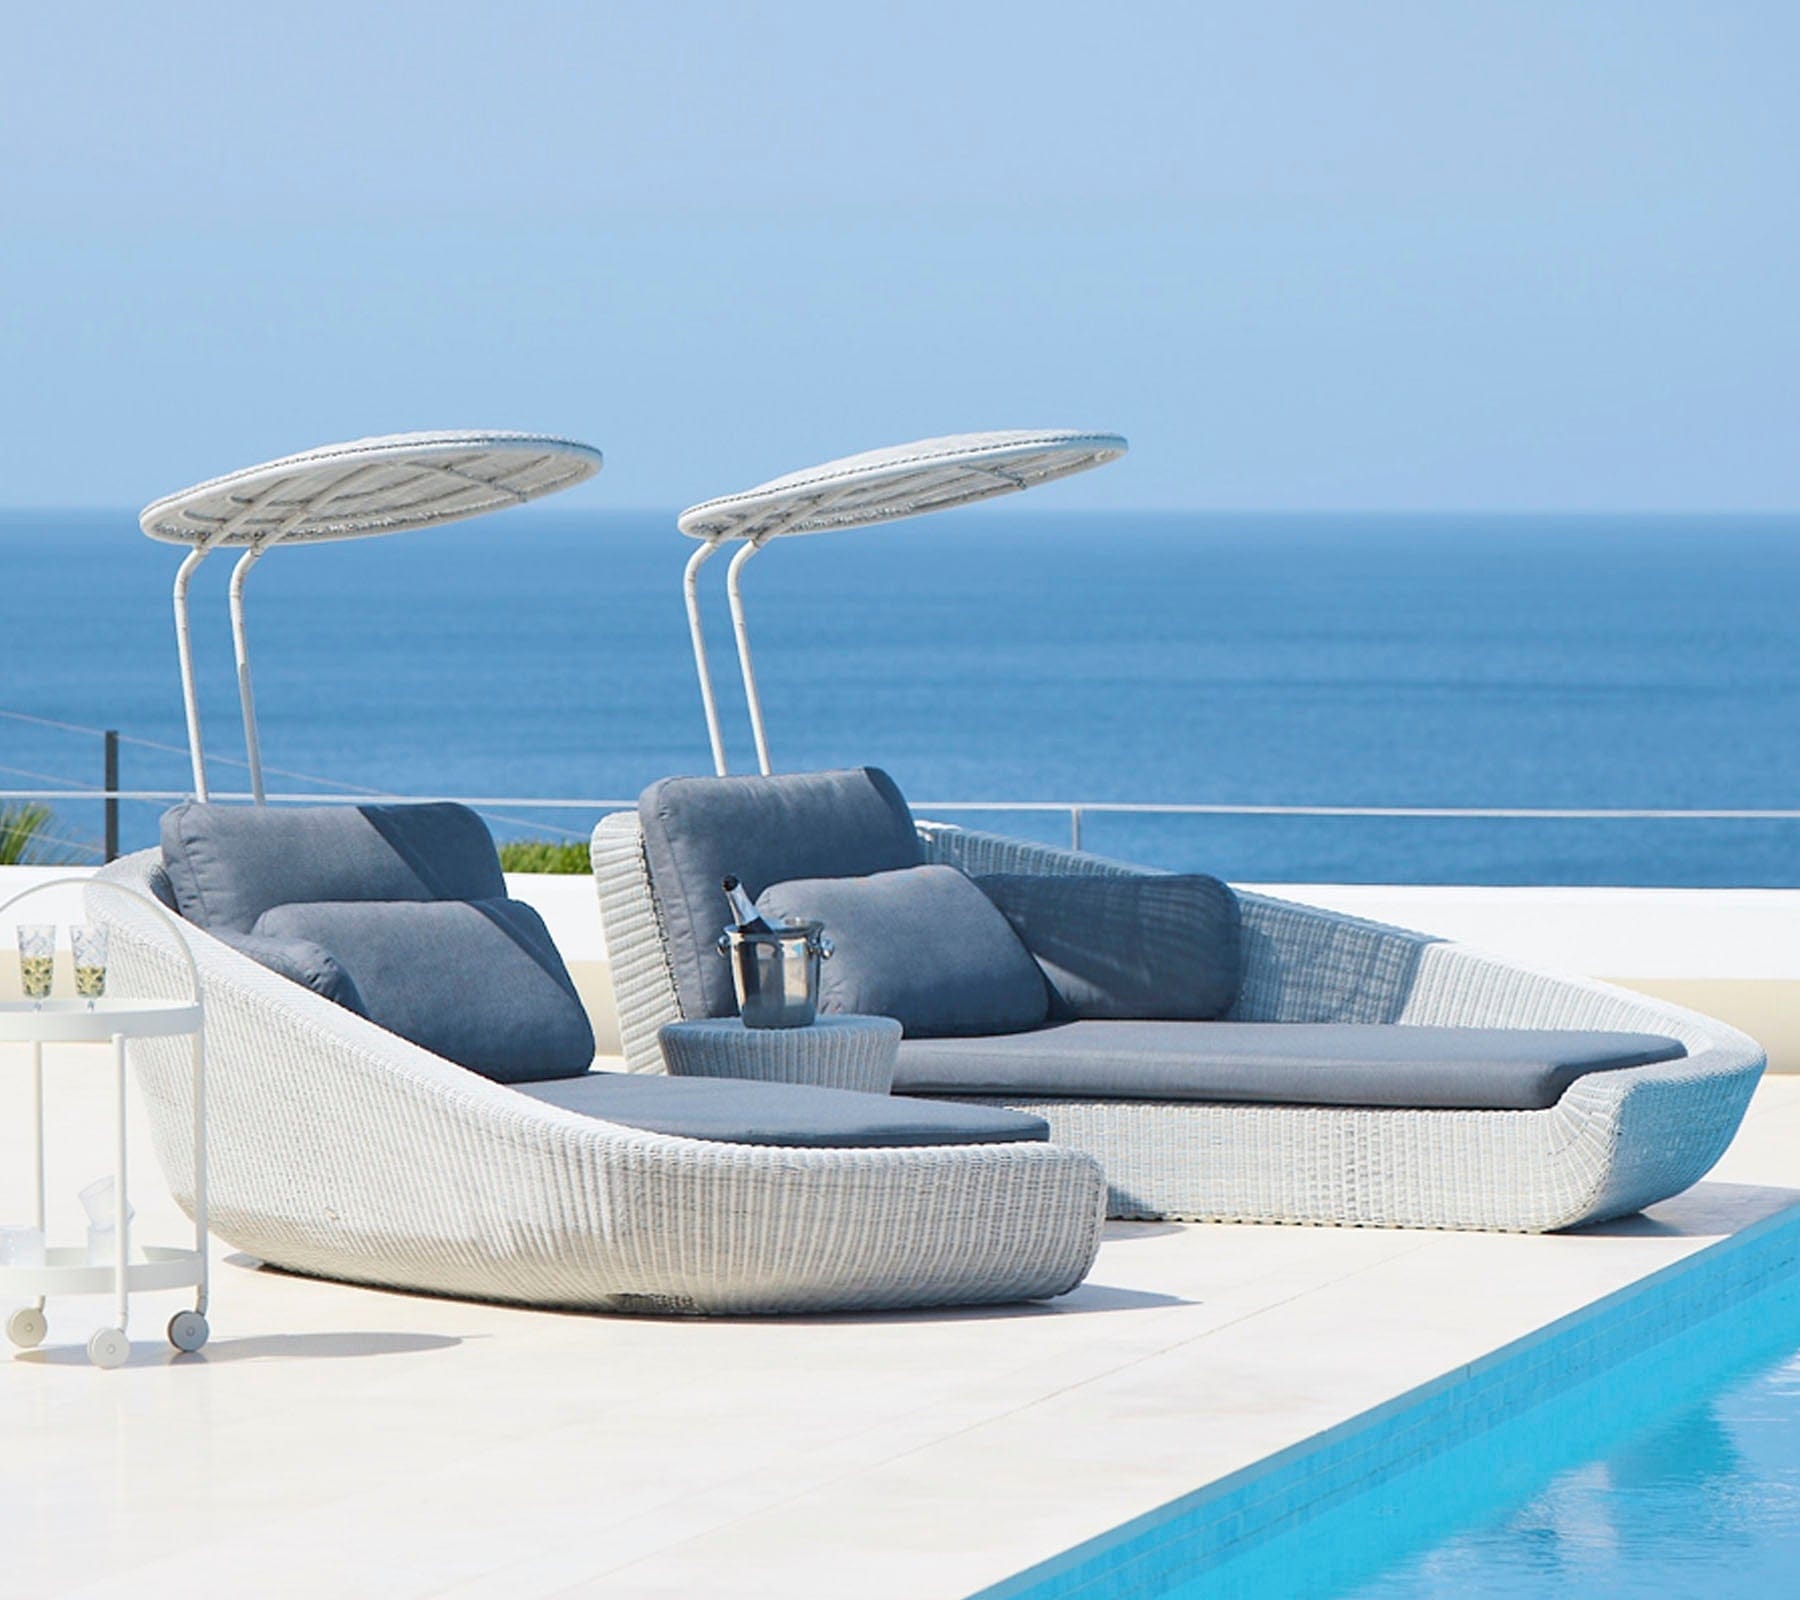 Boxhill's Savannah white grey outdoor sectional chaise lounge with shade with grey cushion placed beside the pool